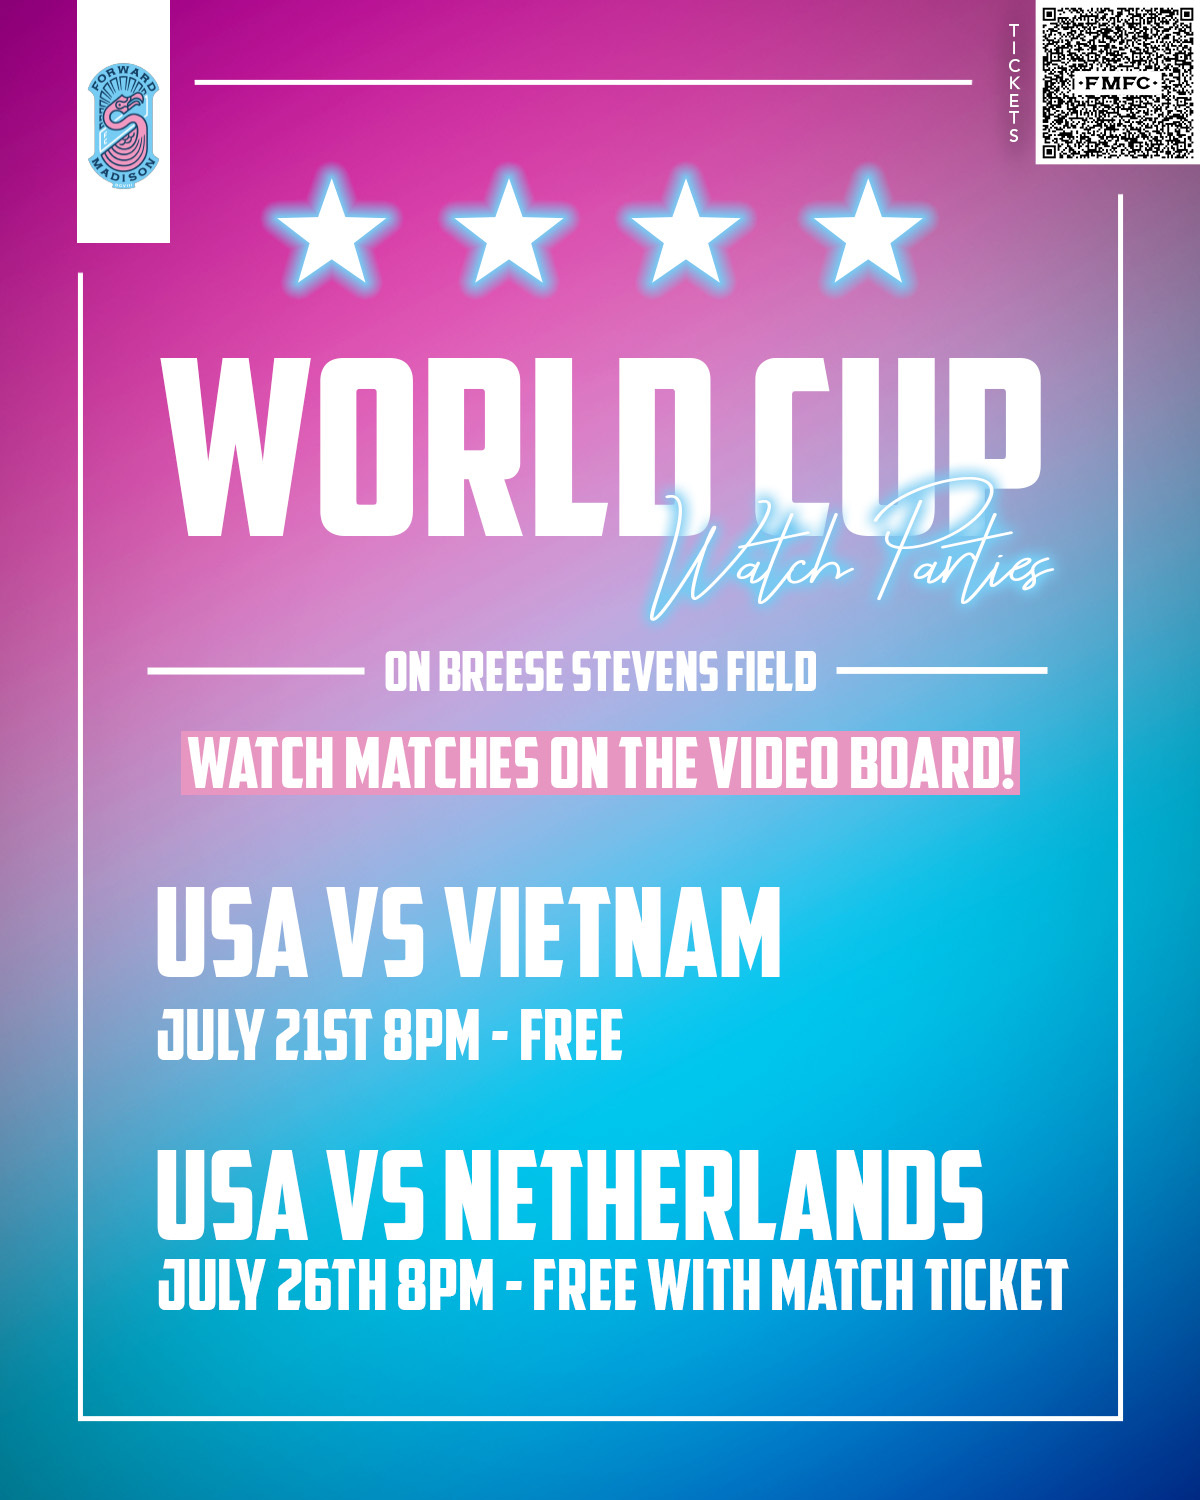 Forward Madison FC to Host Womens World Cup Watch Parties